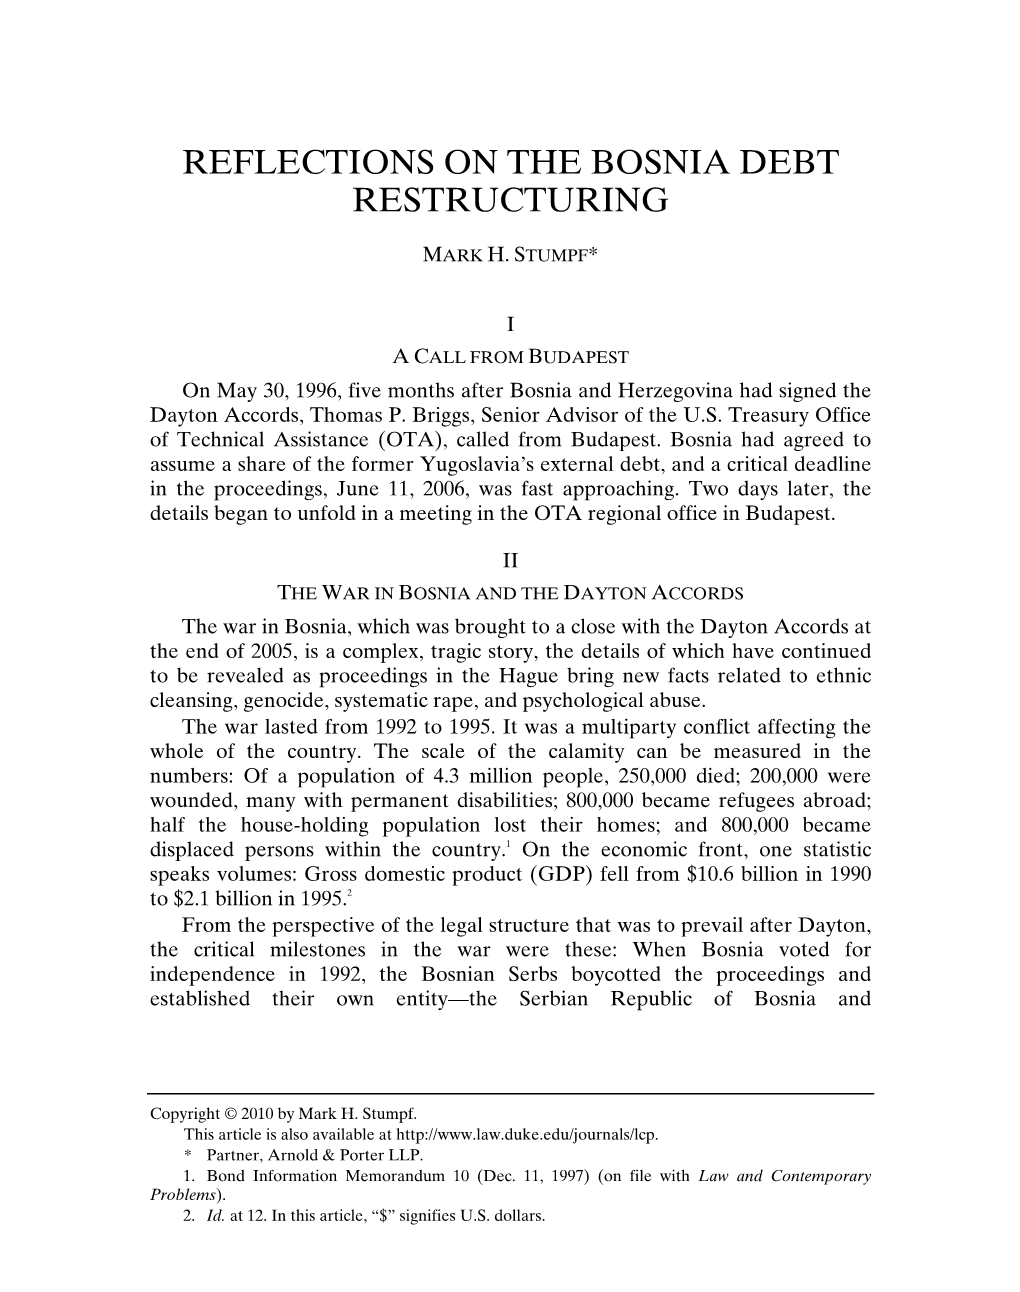 Reflections on the Bosnia Debt Restructuring